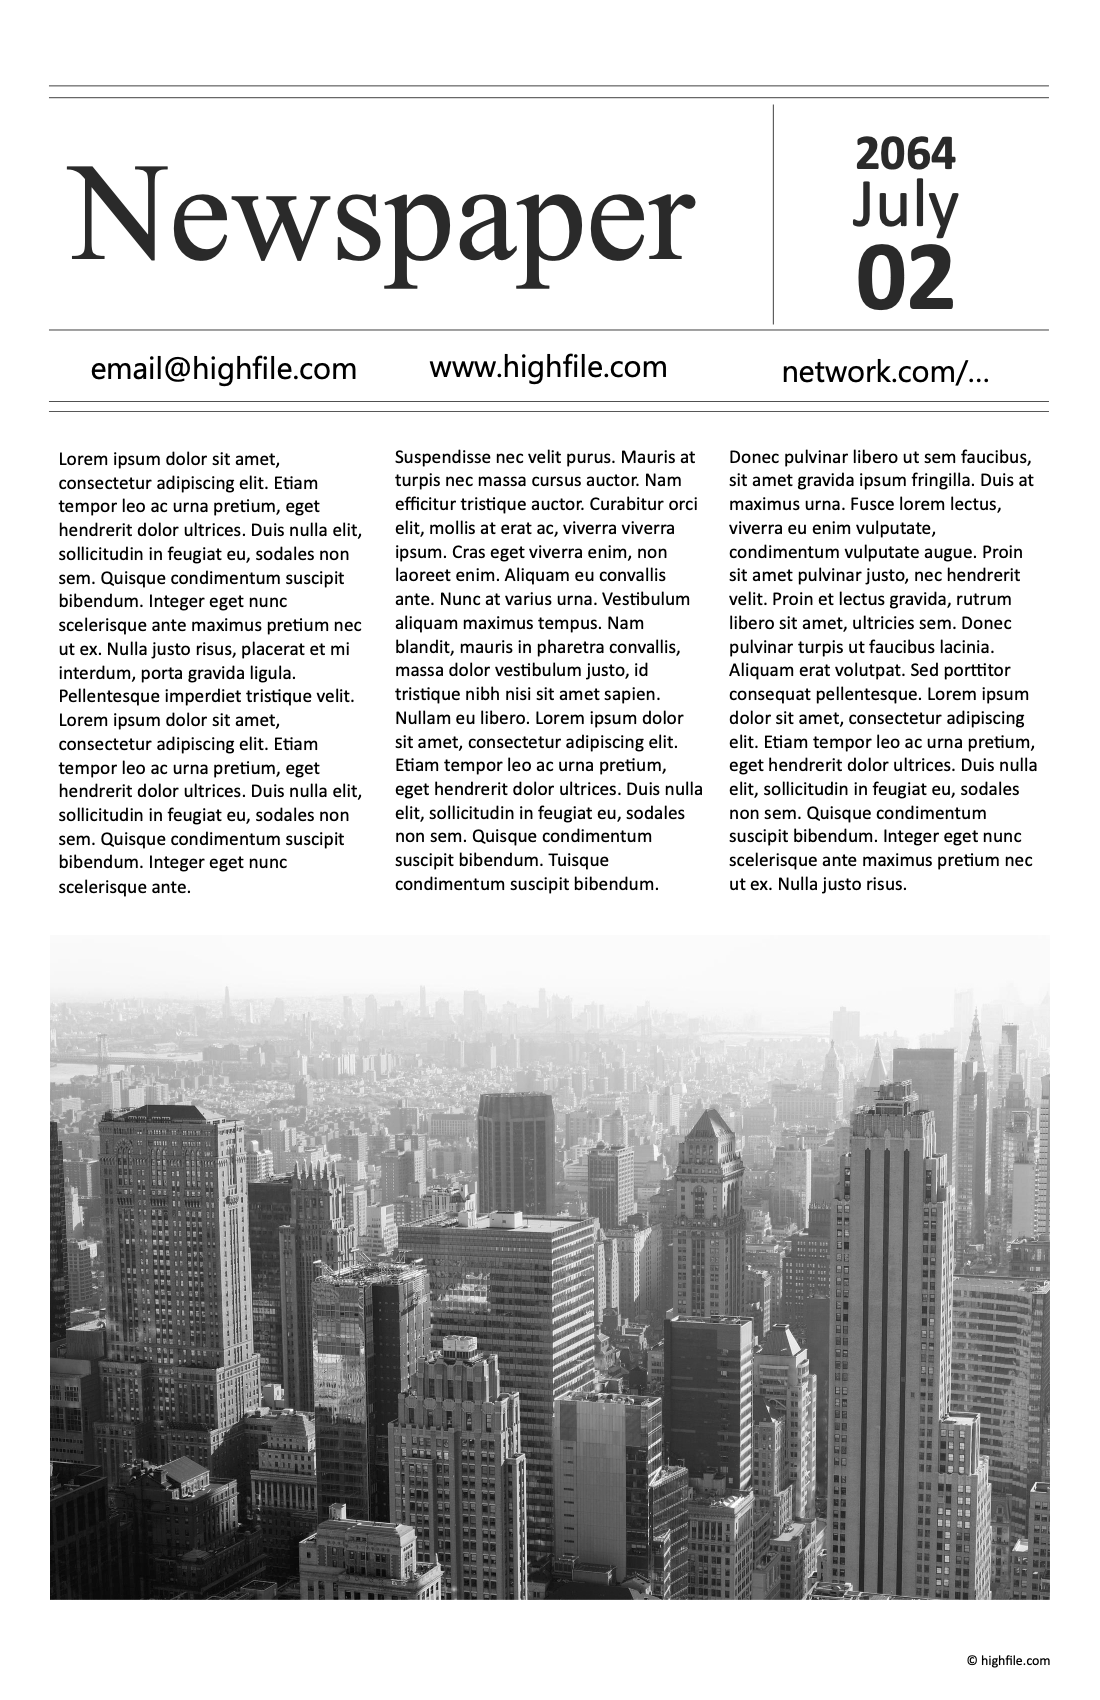 Gray and White Newspaper Article Template Page 01